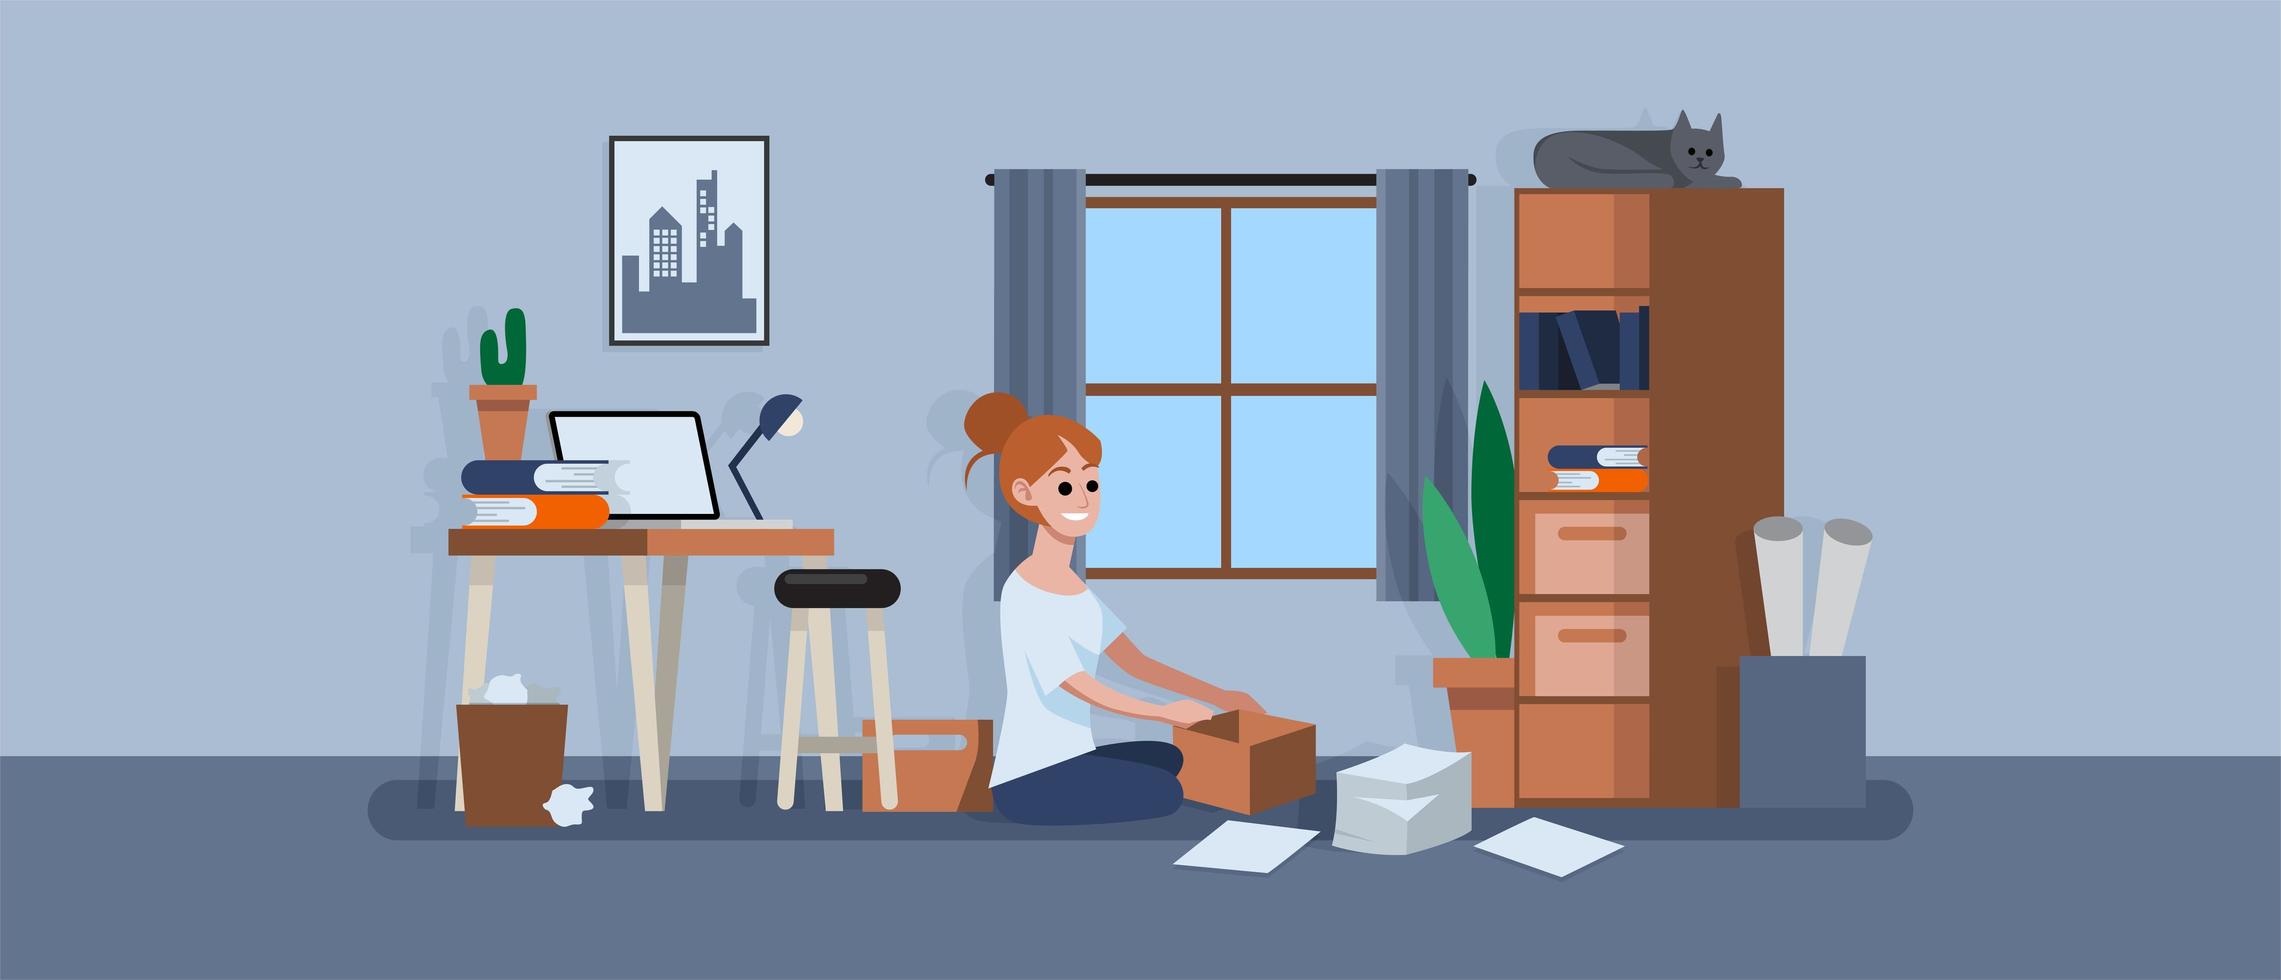 Woman sitting on floor and cleaning workspace vector